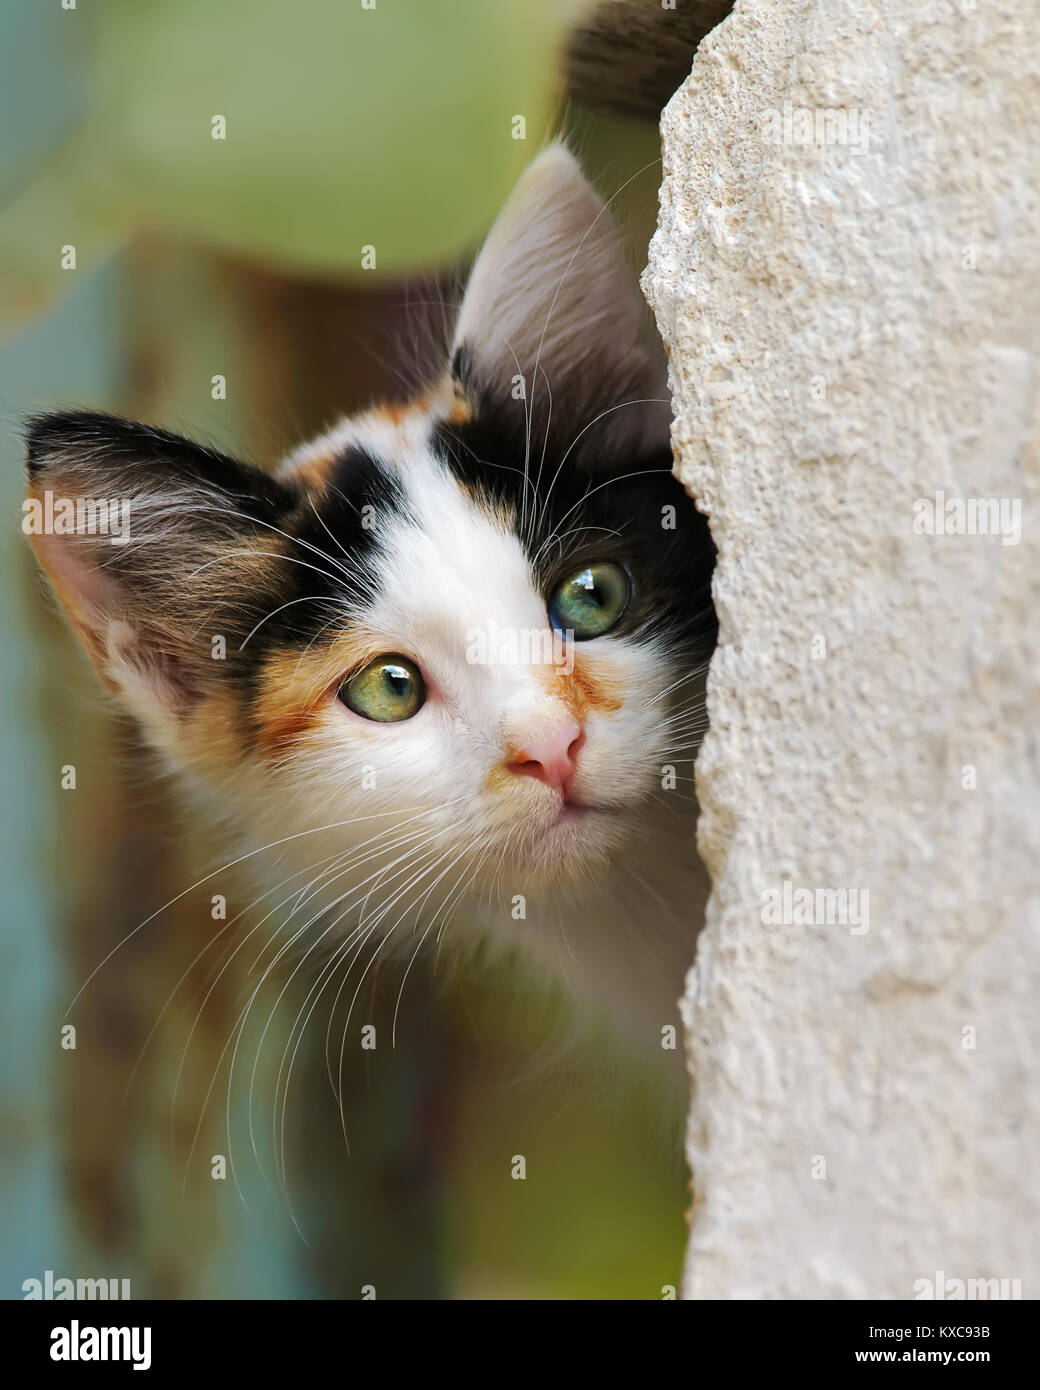 Cute tricolor calico patched tabby kitten peering from behind a wall with prying eyes, close-up cat portrait, Cyprus Stock Photo